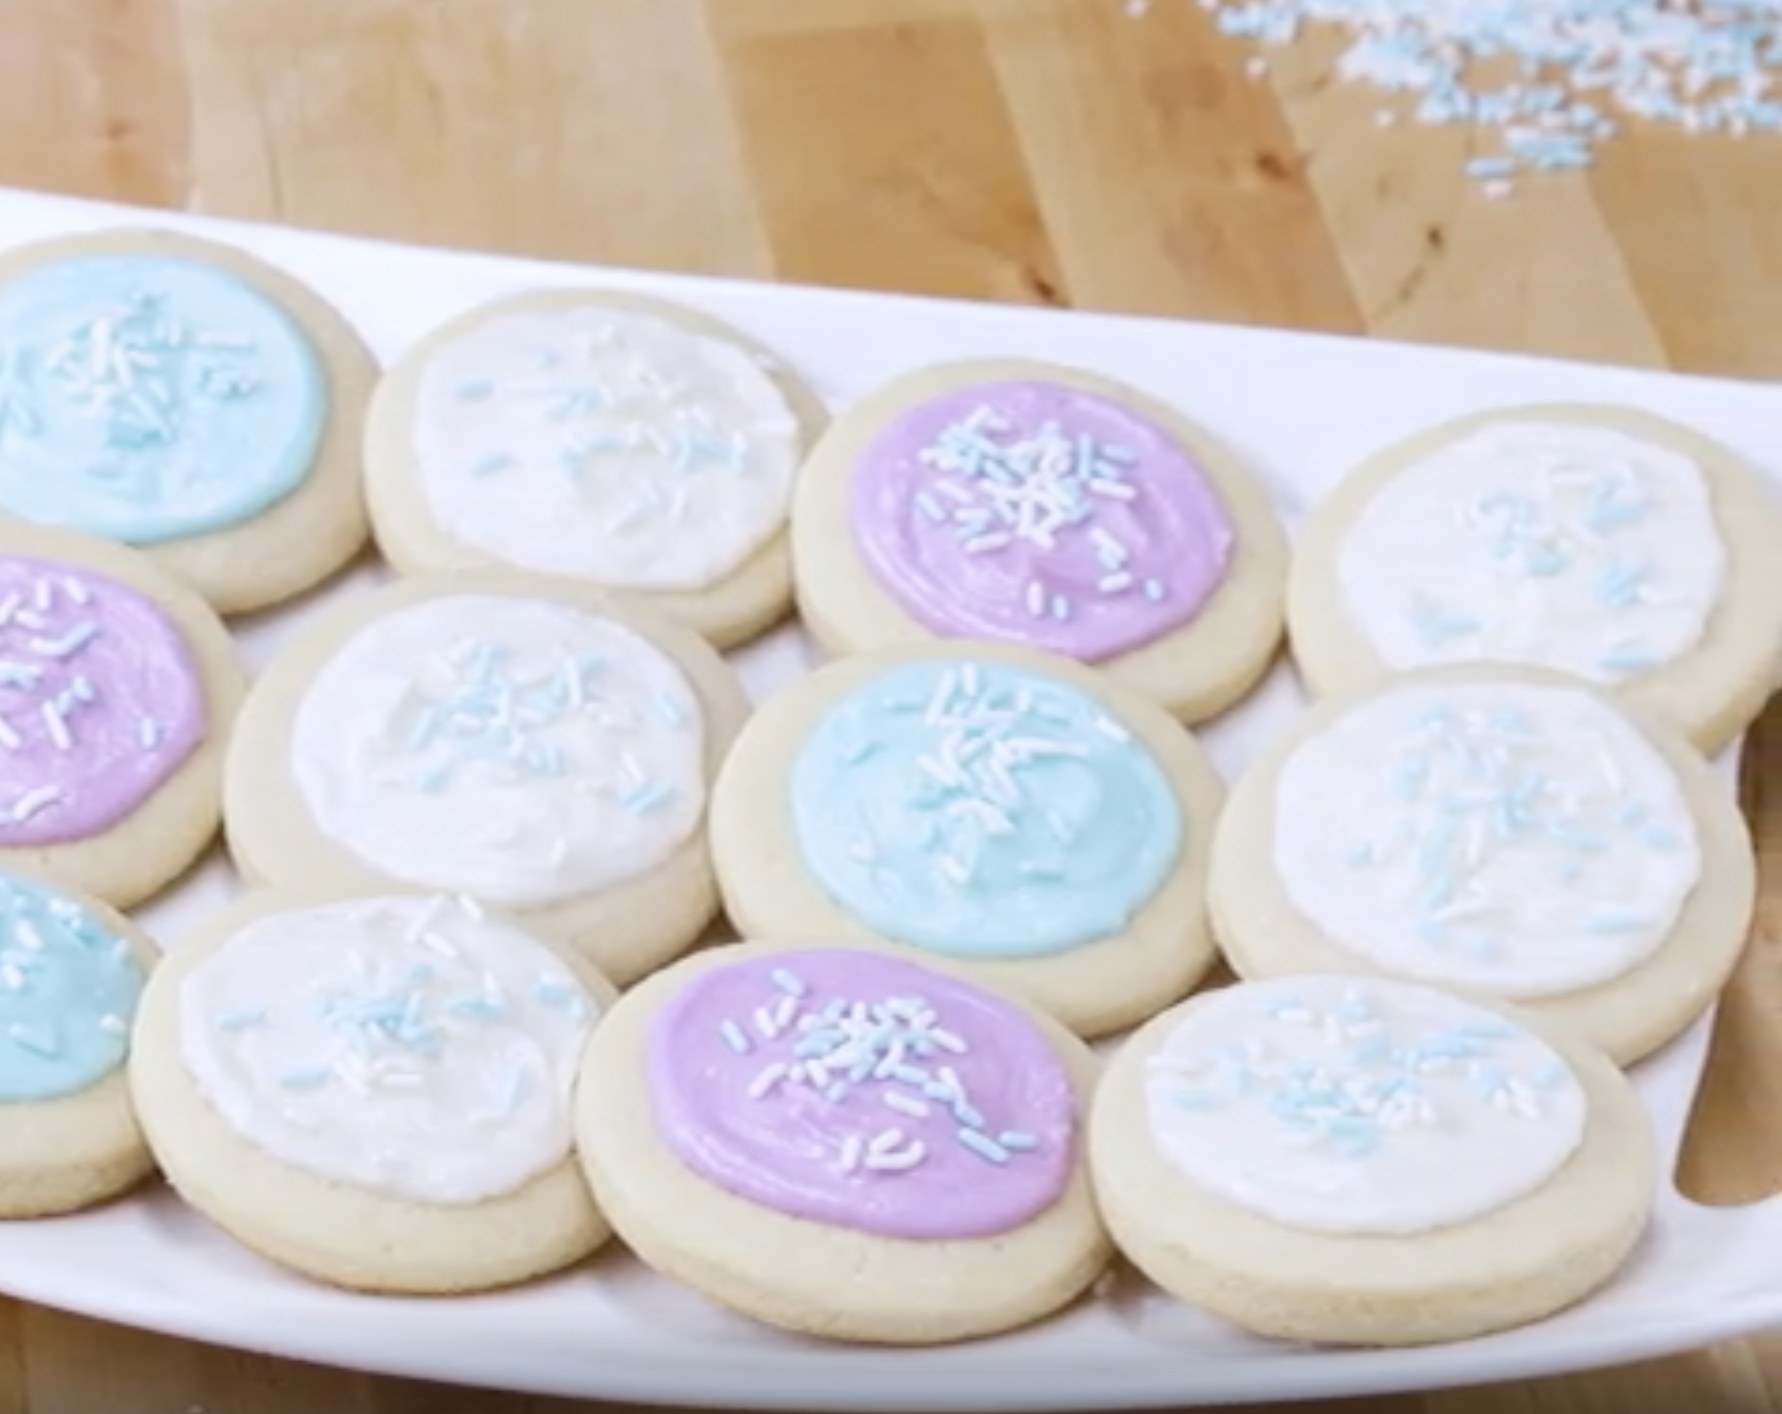 The sugar cookies with different color icing on top